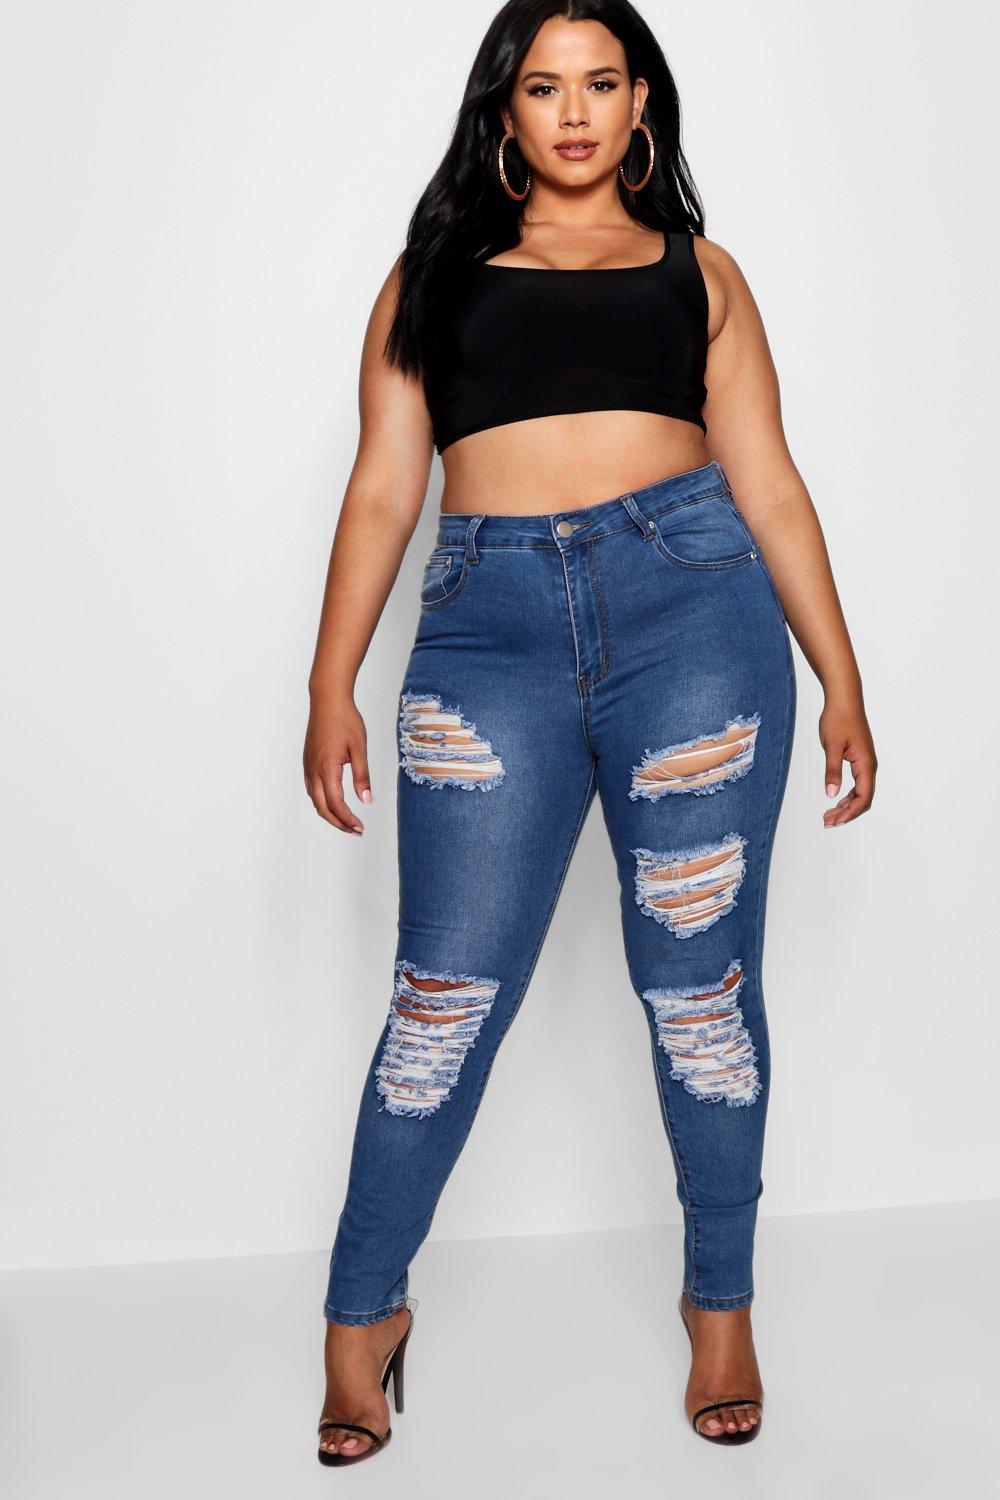 plus size ripped jeans uk